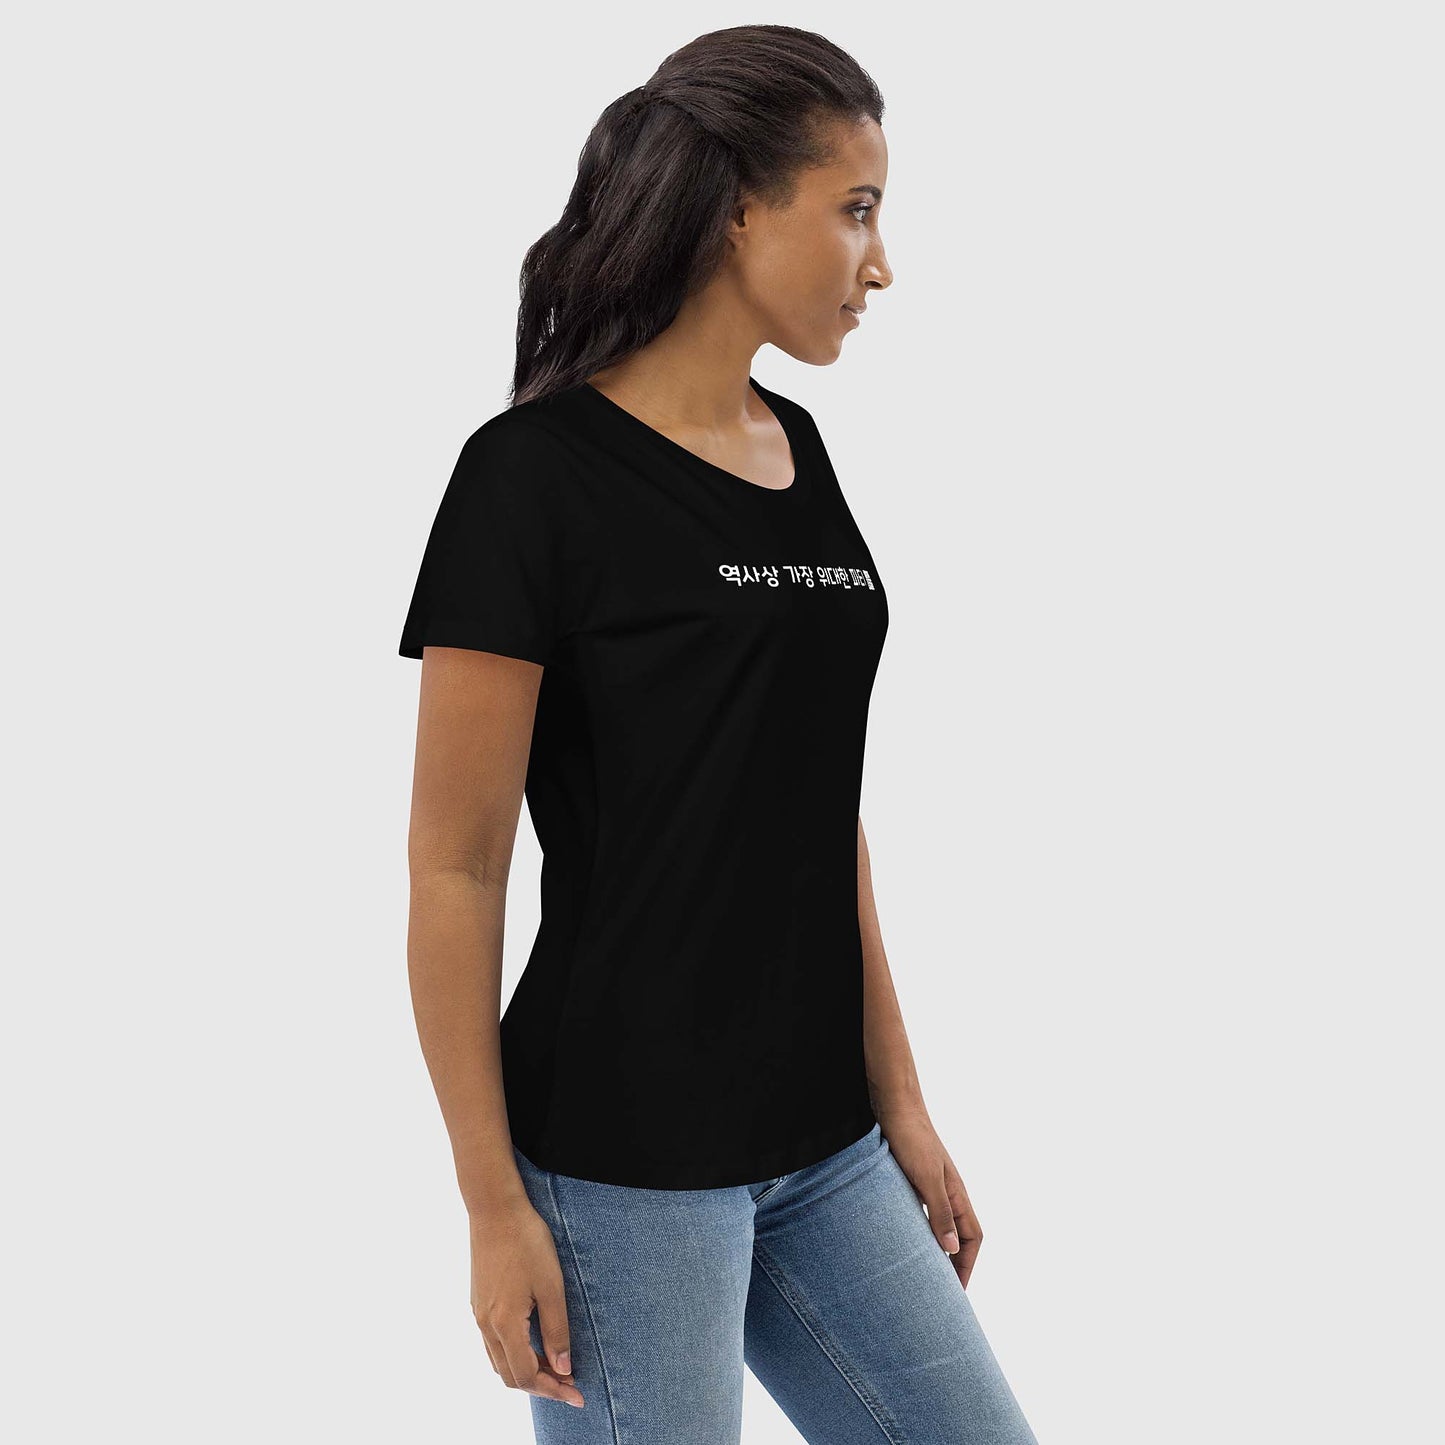 Women's black fitted organic cotton t-shirt with Korean 2269 party message